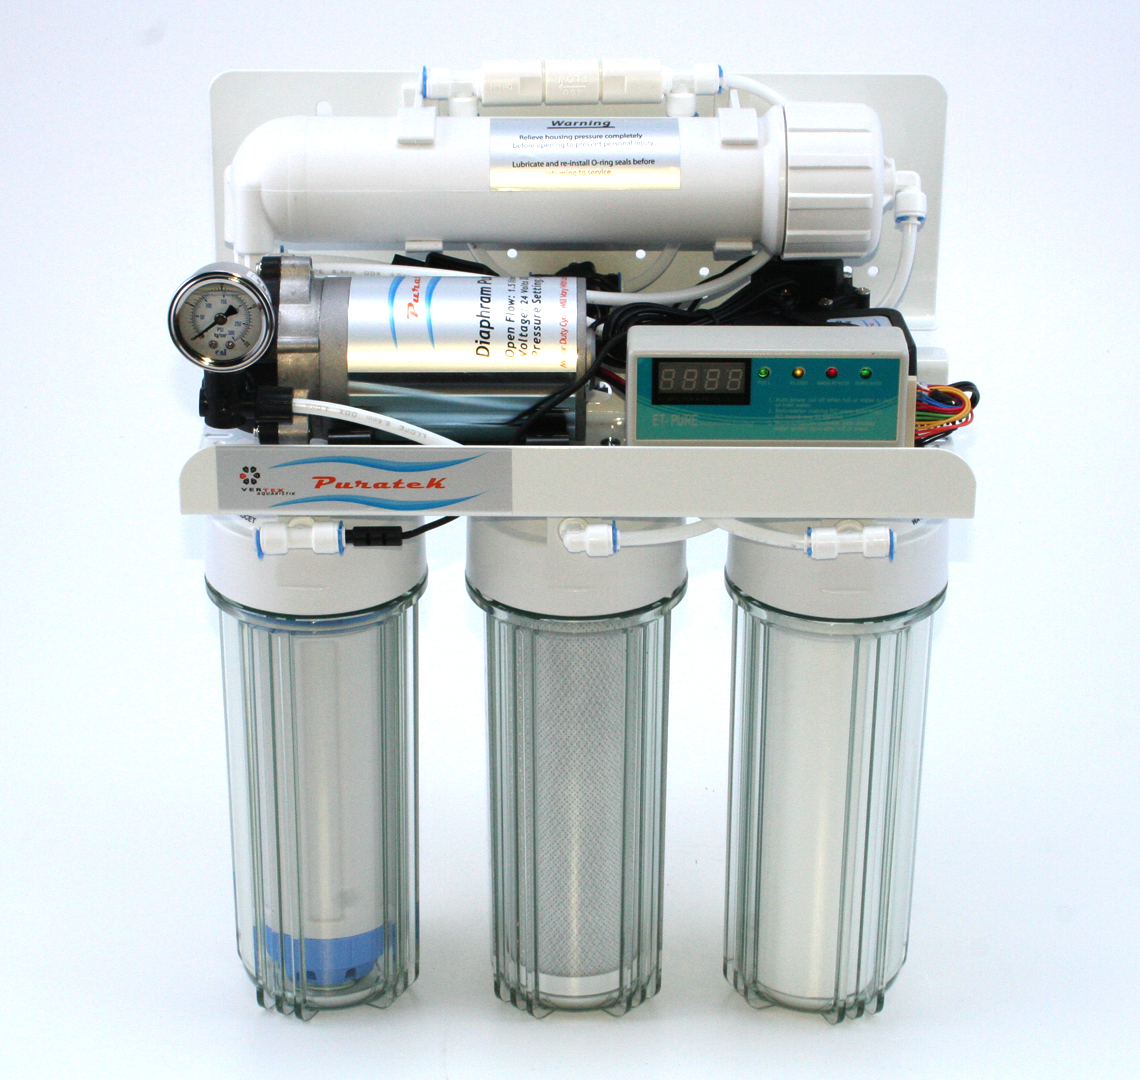 Water filters in an RO system